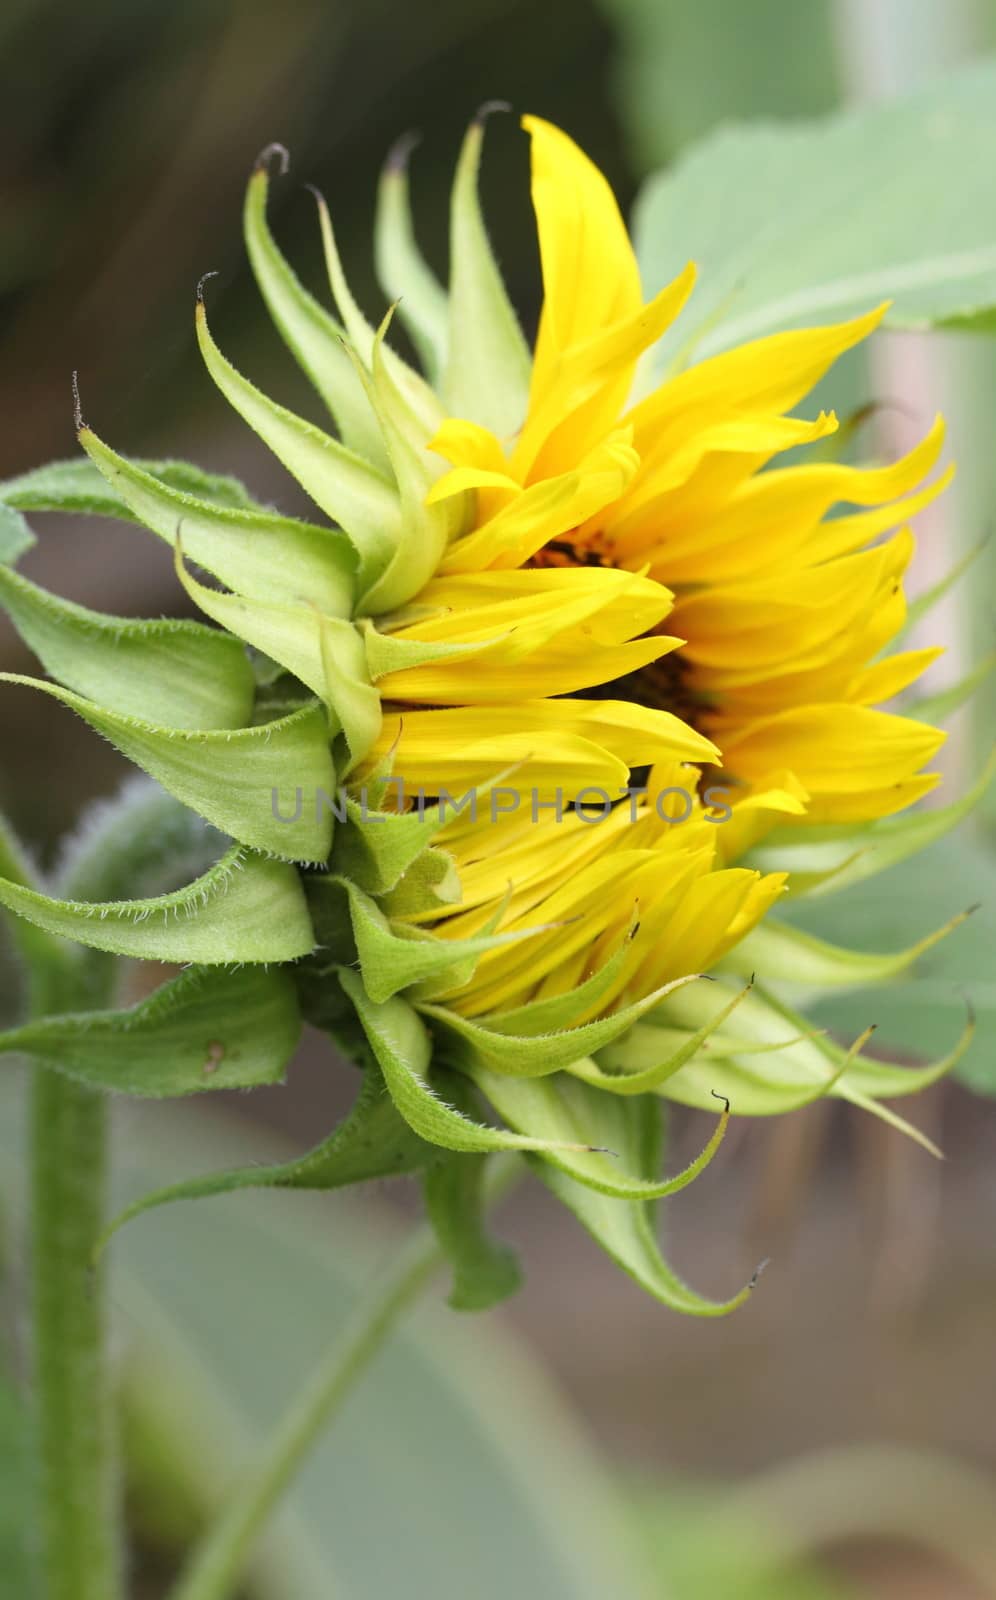 Sunflower opening by mitzy